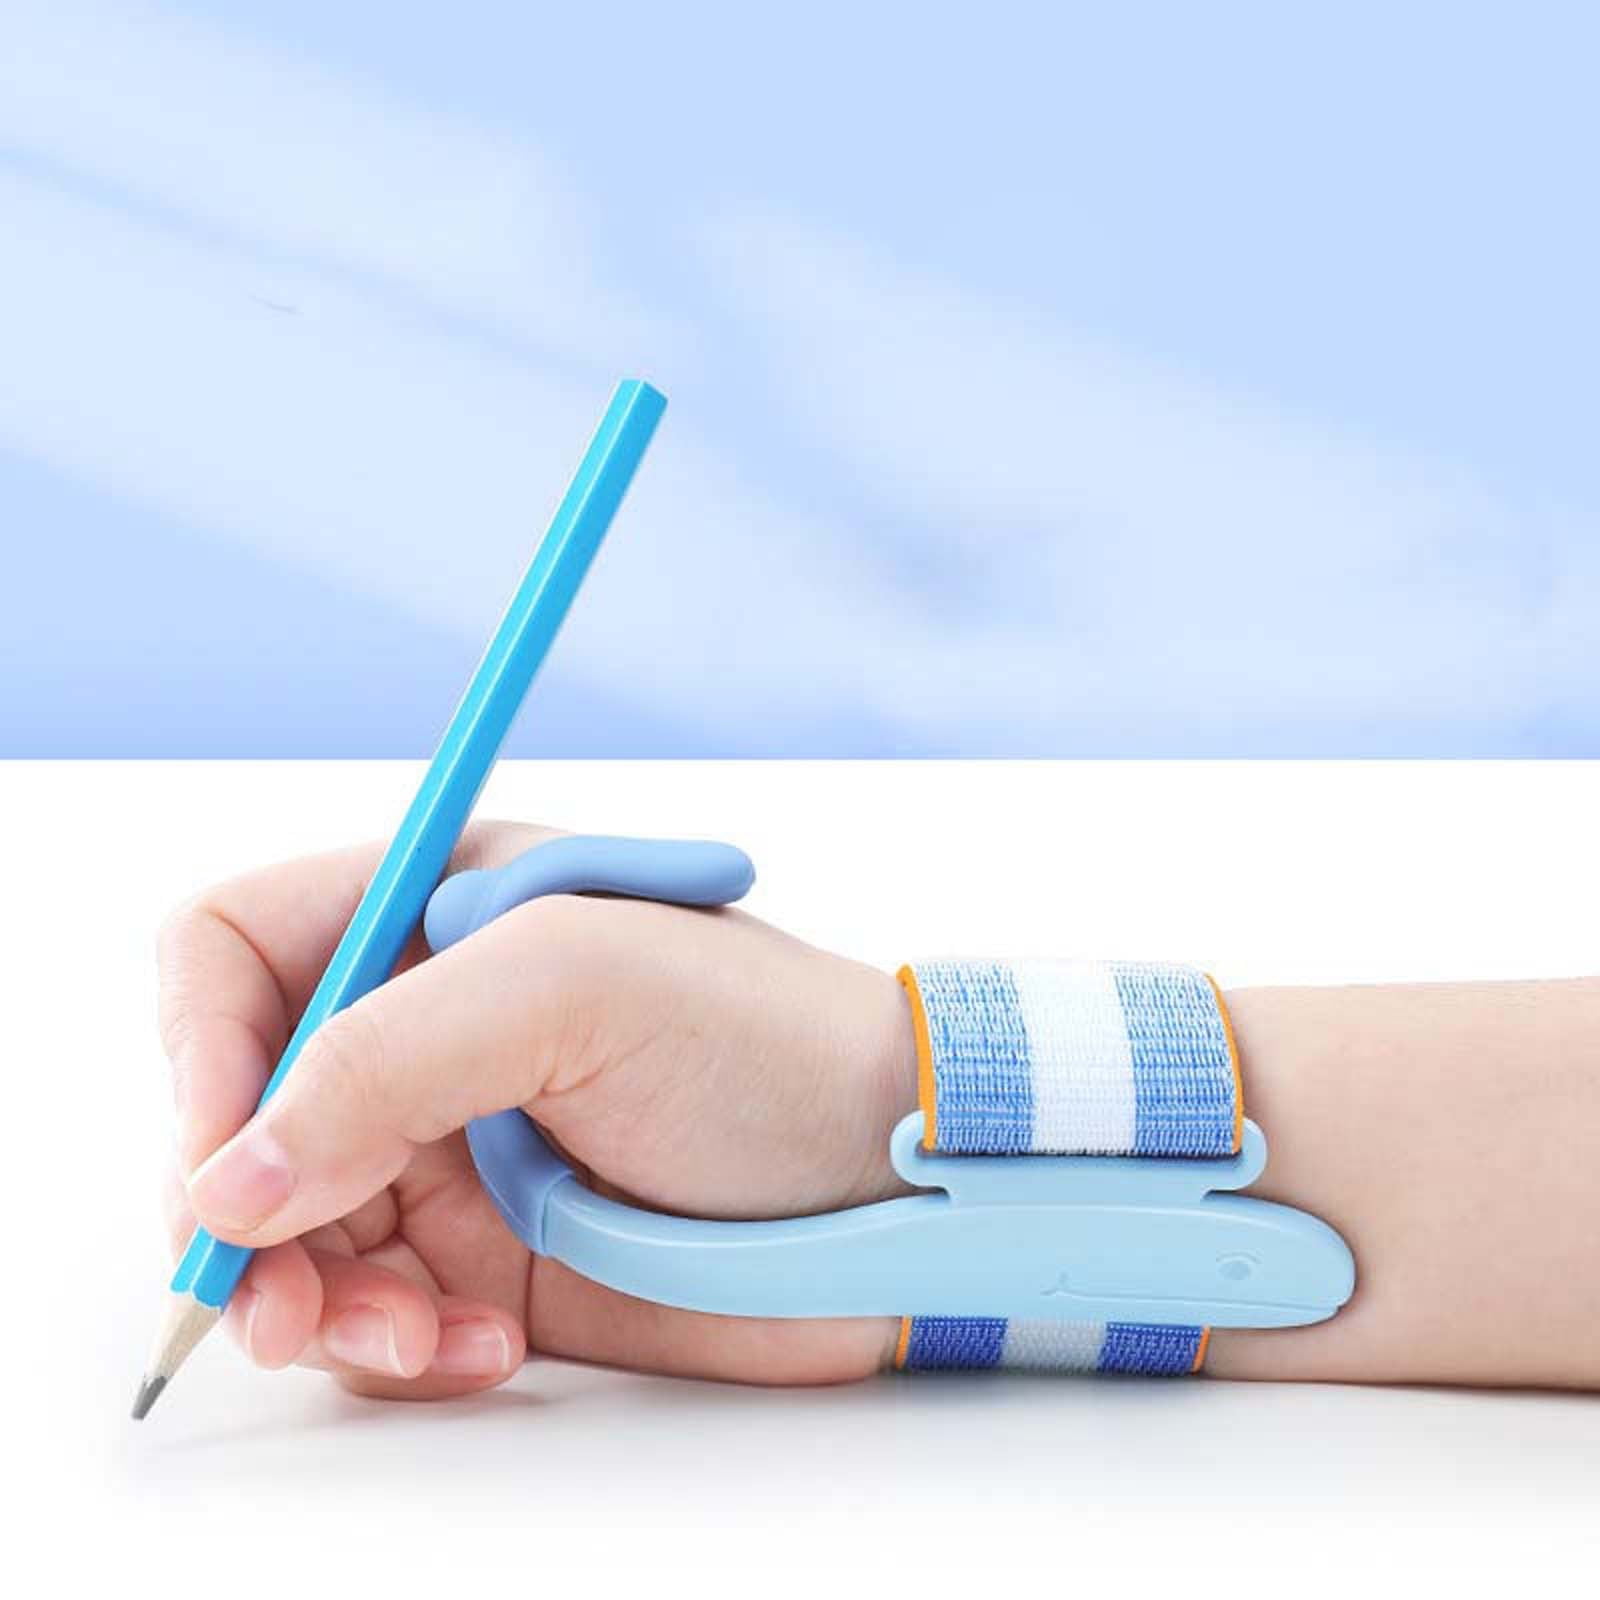 Operitacx Anti-Hook Wrist Brace Anti-Skid Pens Corrector Writing Training  Devices The Grooved Handwriting Book Preschool Pencils Dr Grip Double Layer